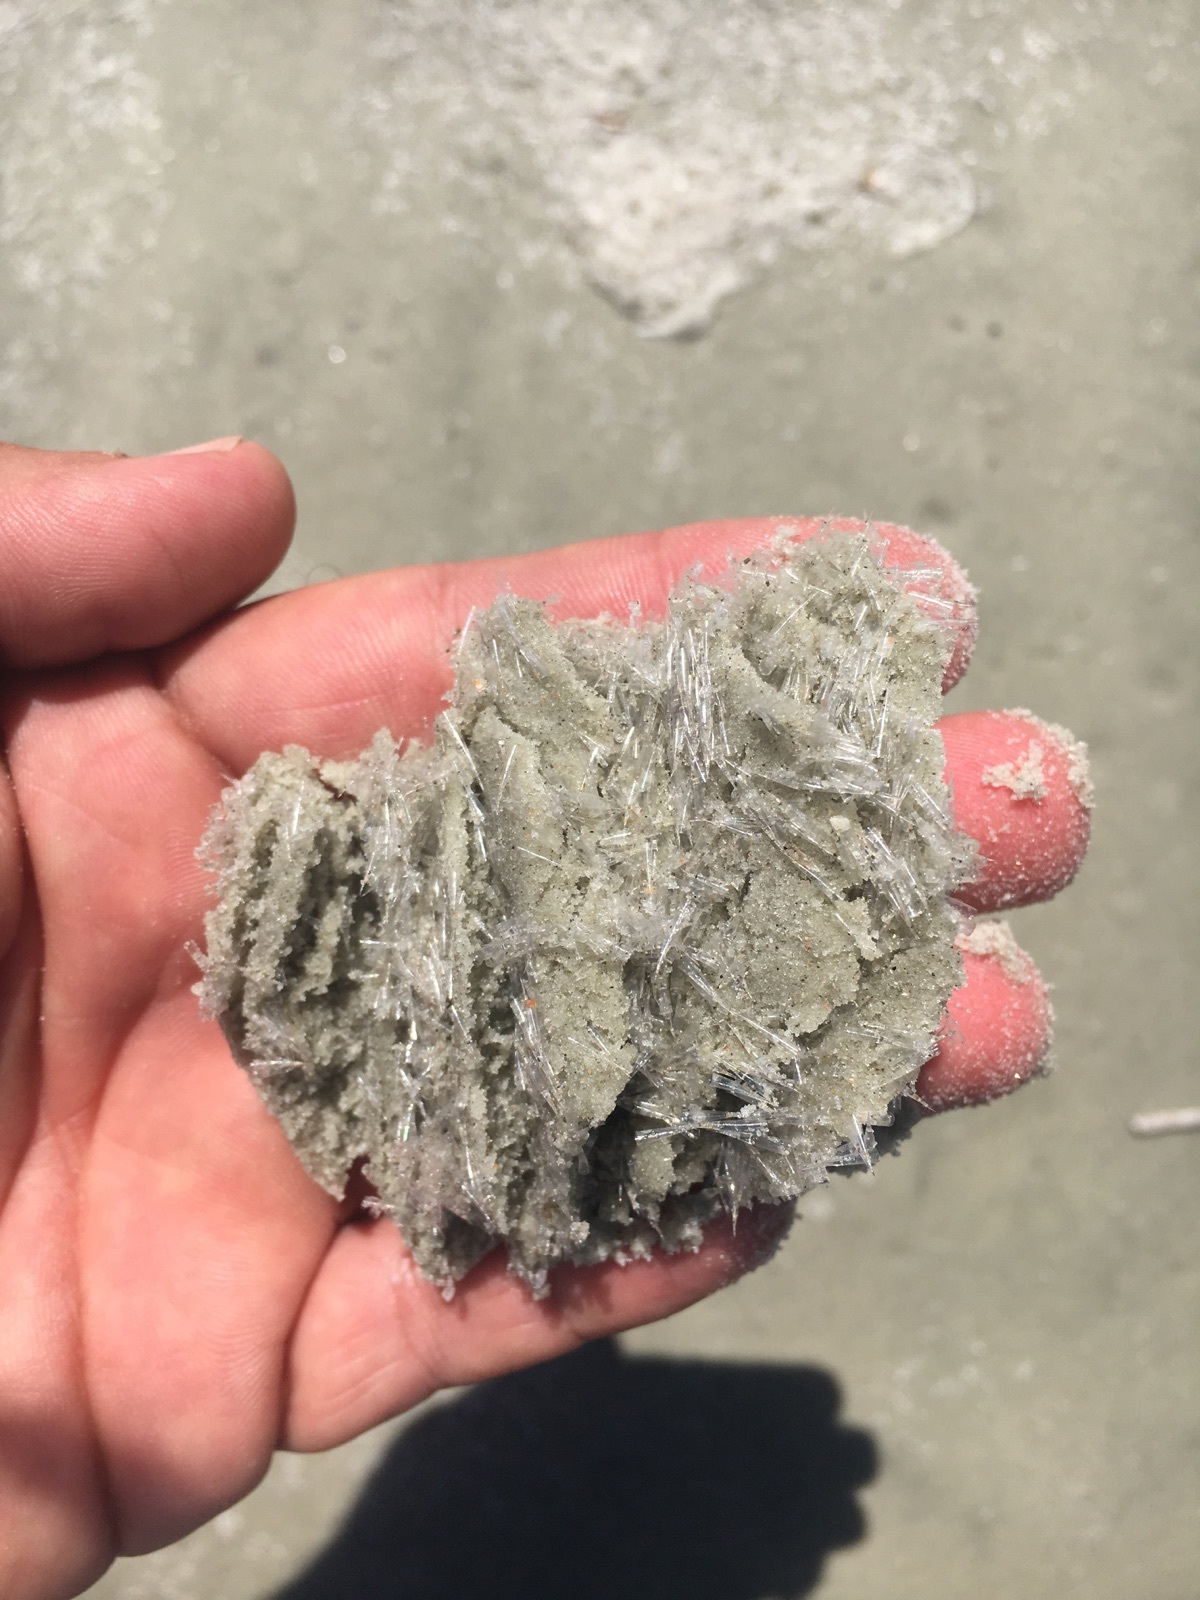 Mollusks, known as sea butterflies, have been washing ashore. Photo courtesy of the Volusia County Beach Safety Ocean Rescue.